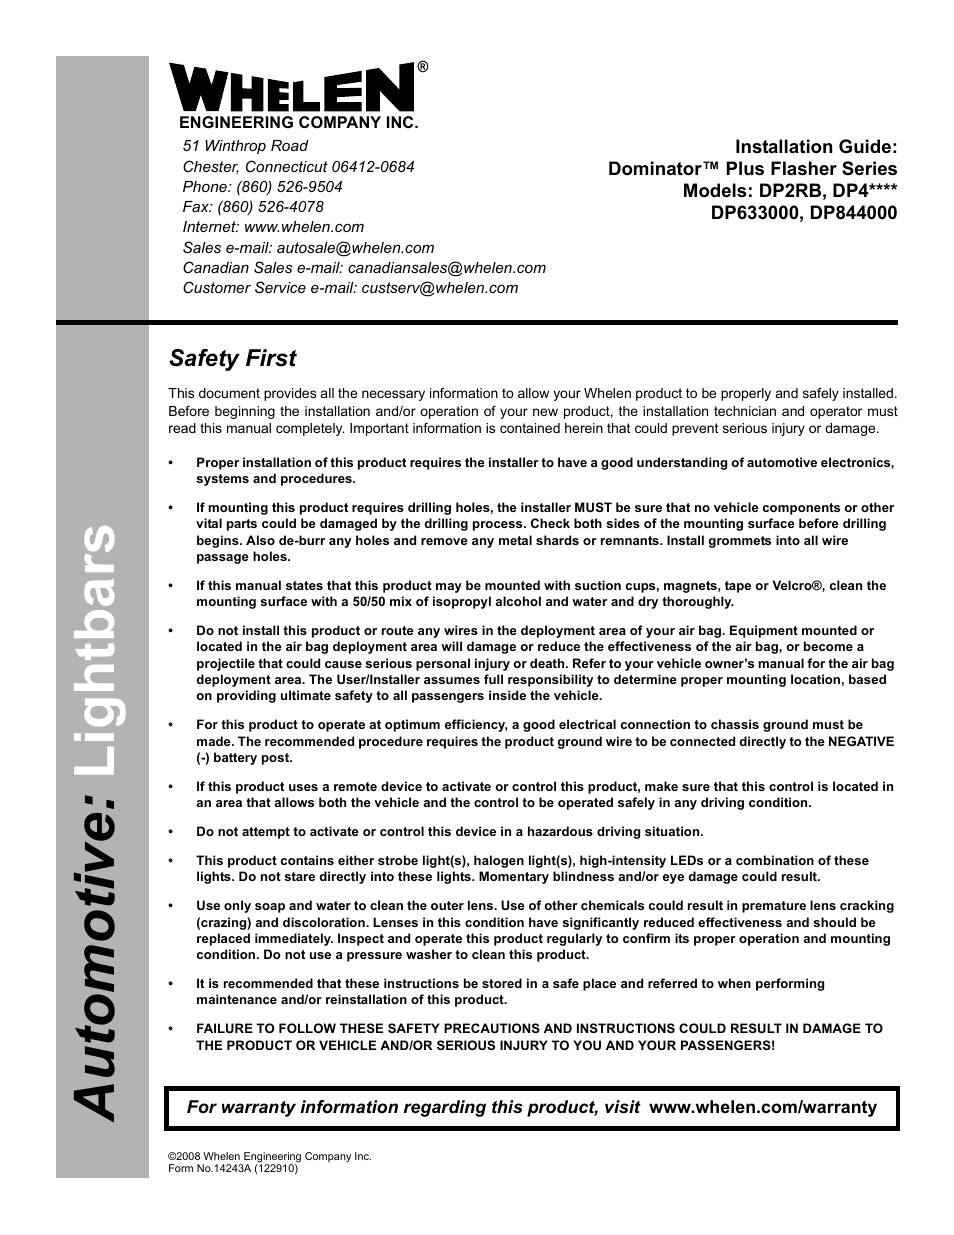 Whelen DP2AA User Manual | 3 pages